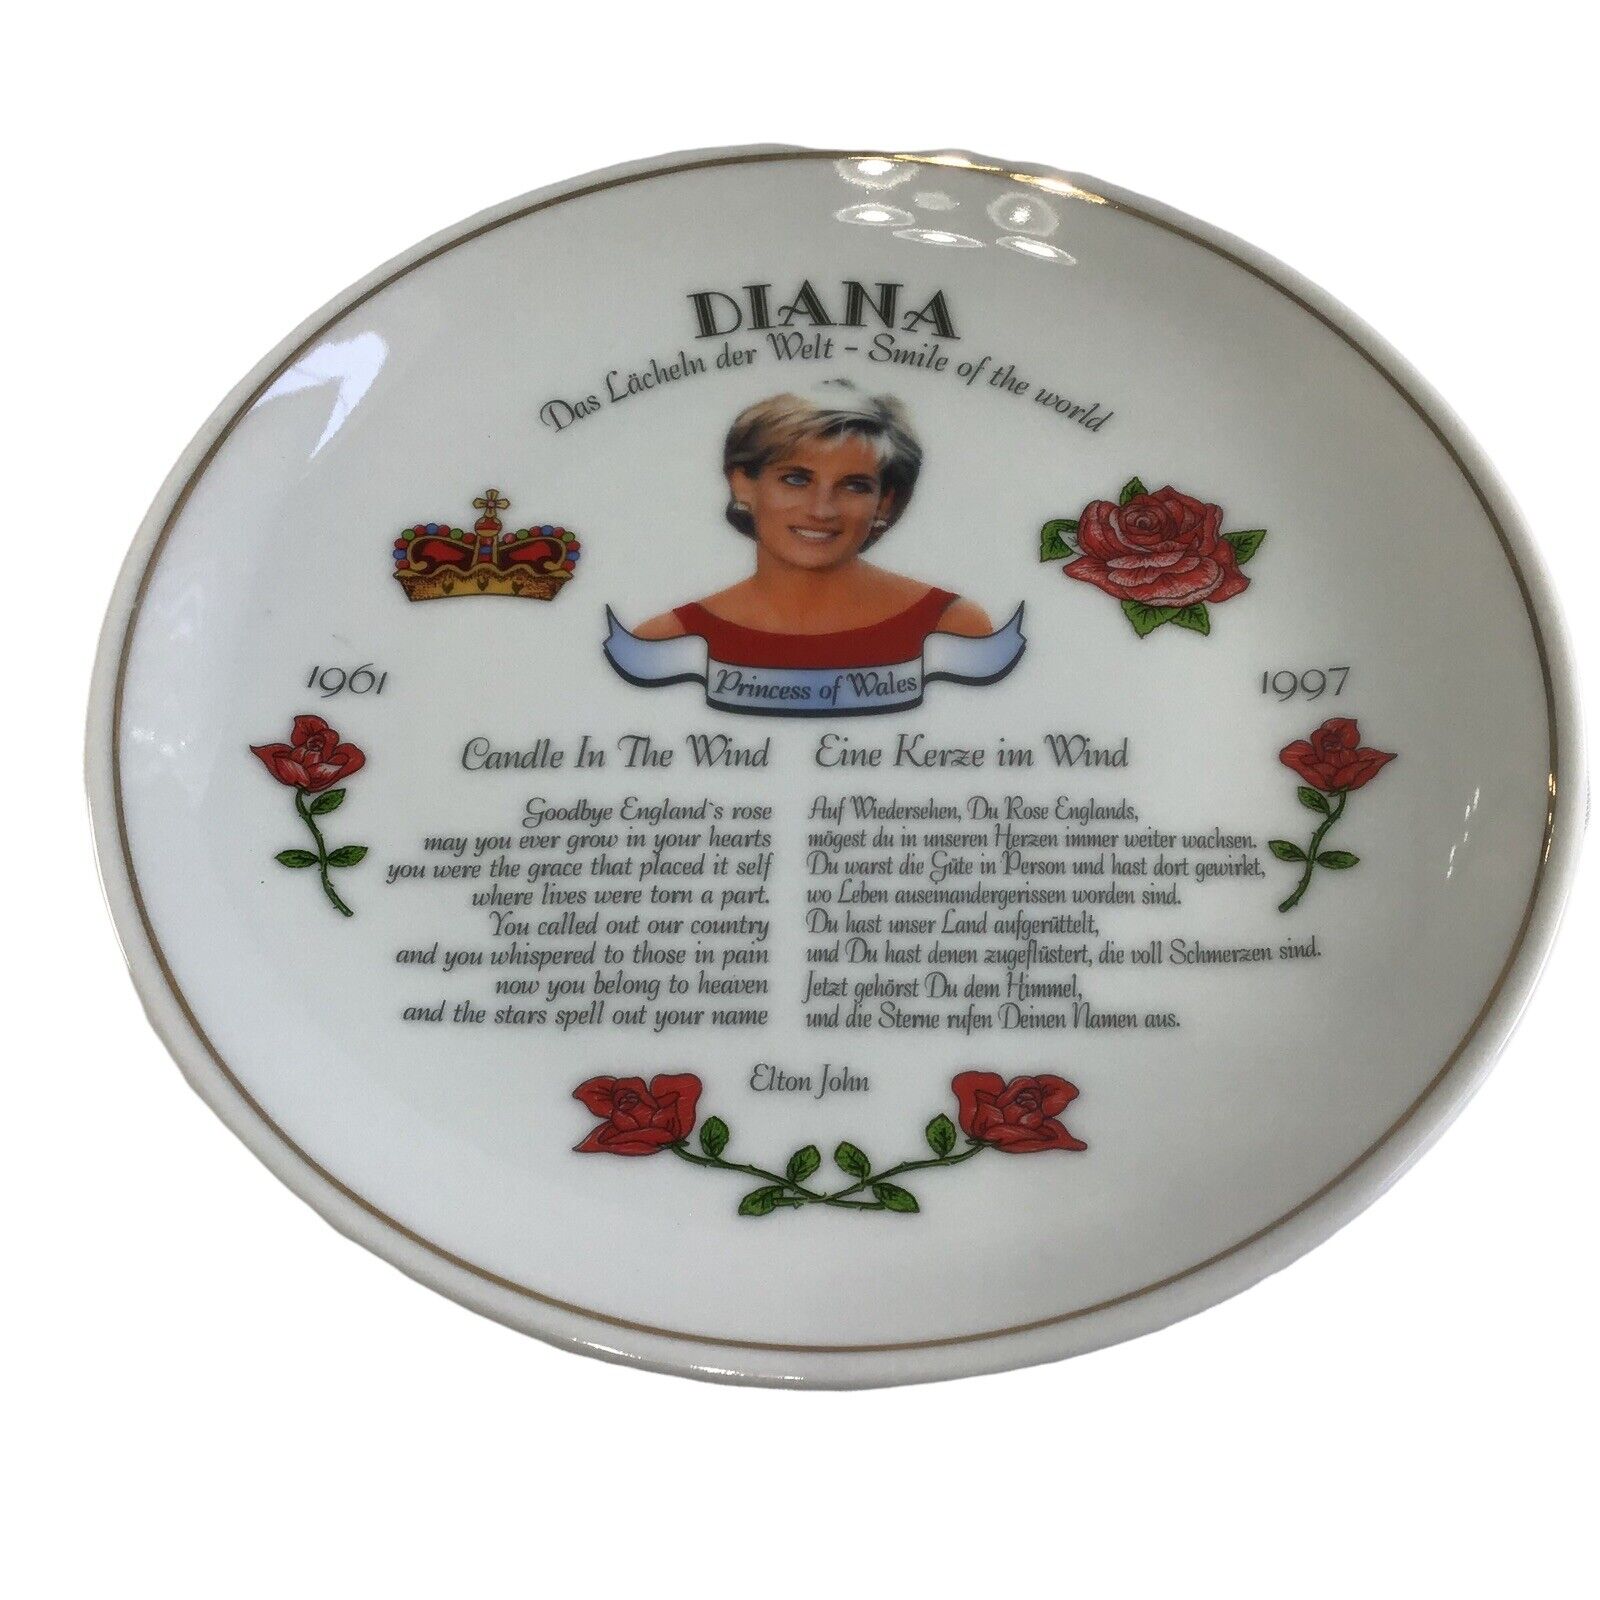 VINTAGE PRINCESS DIANA CANDLE IN THE WIND PLATE LYRICS IN ENGLISH AND GERMAN 